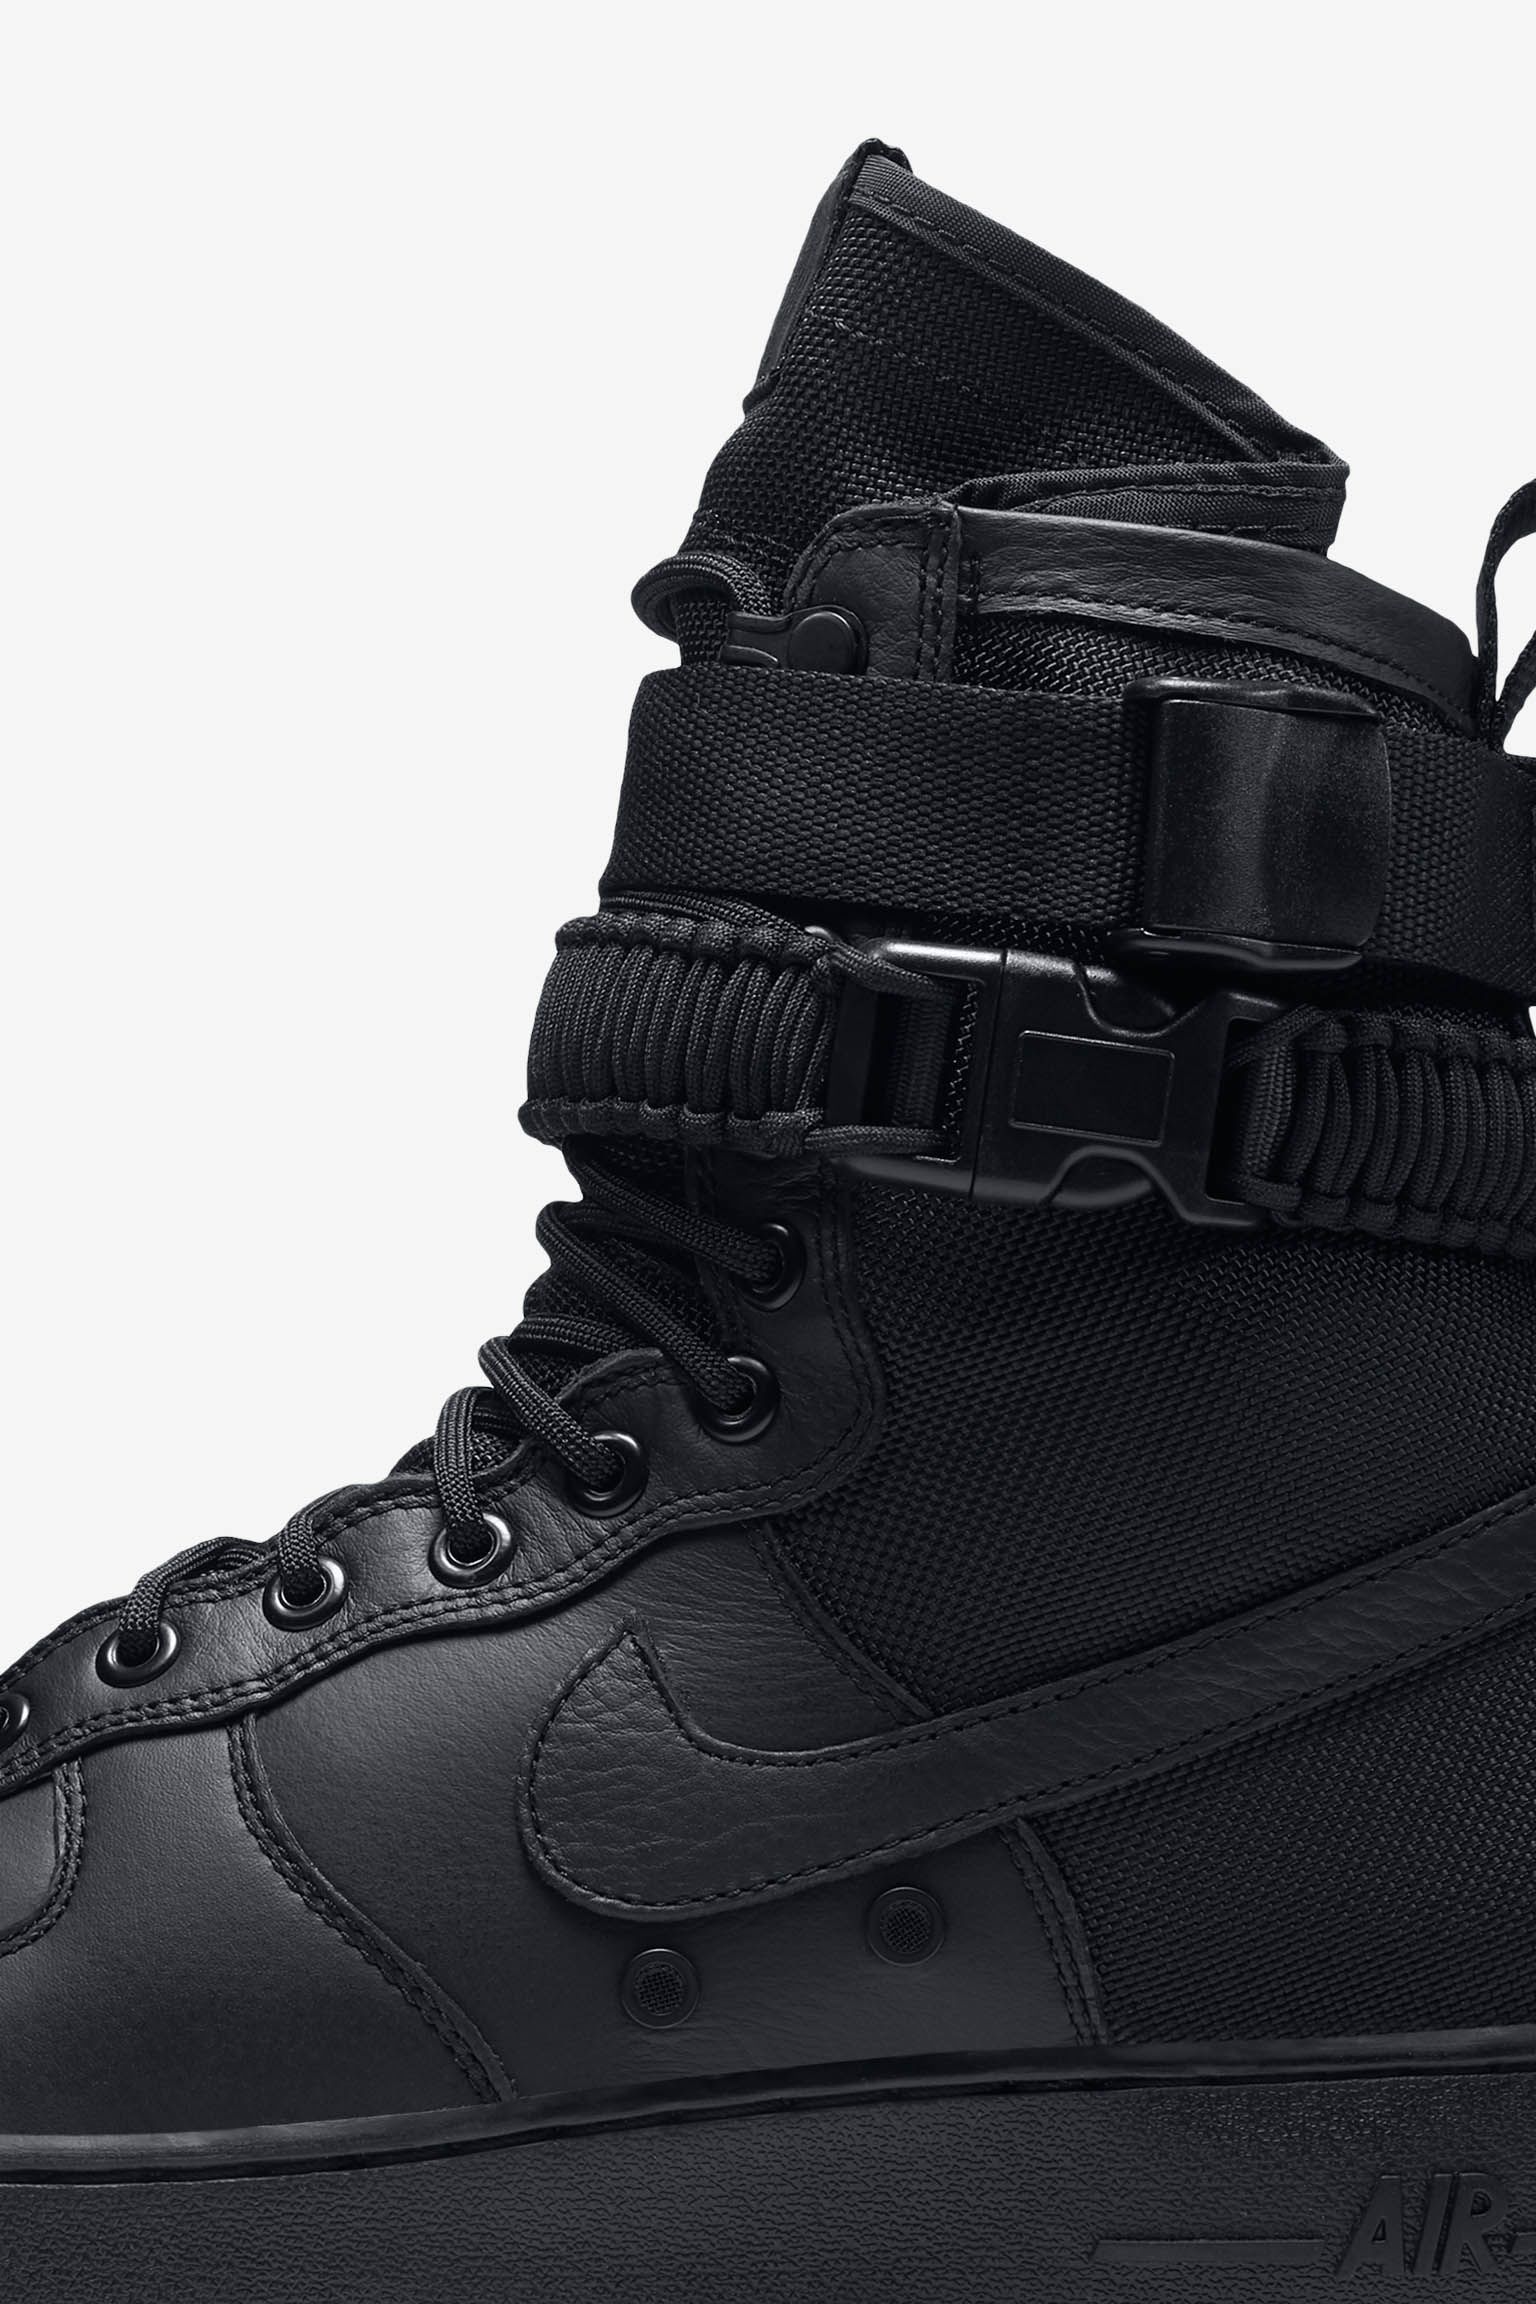 inject Wink Precede Nike Air Force 1 Sf Triple Black Switzerland, SAVE 49% - aveclumiere.com